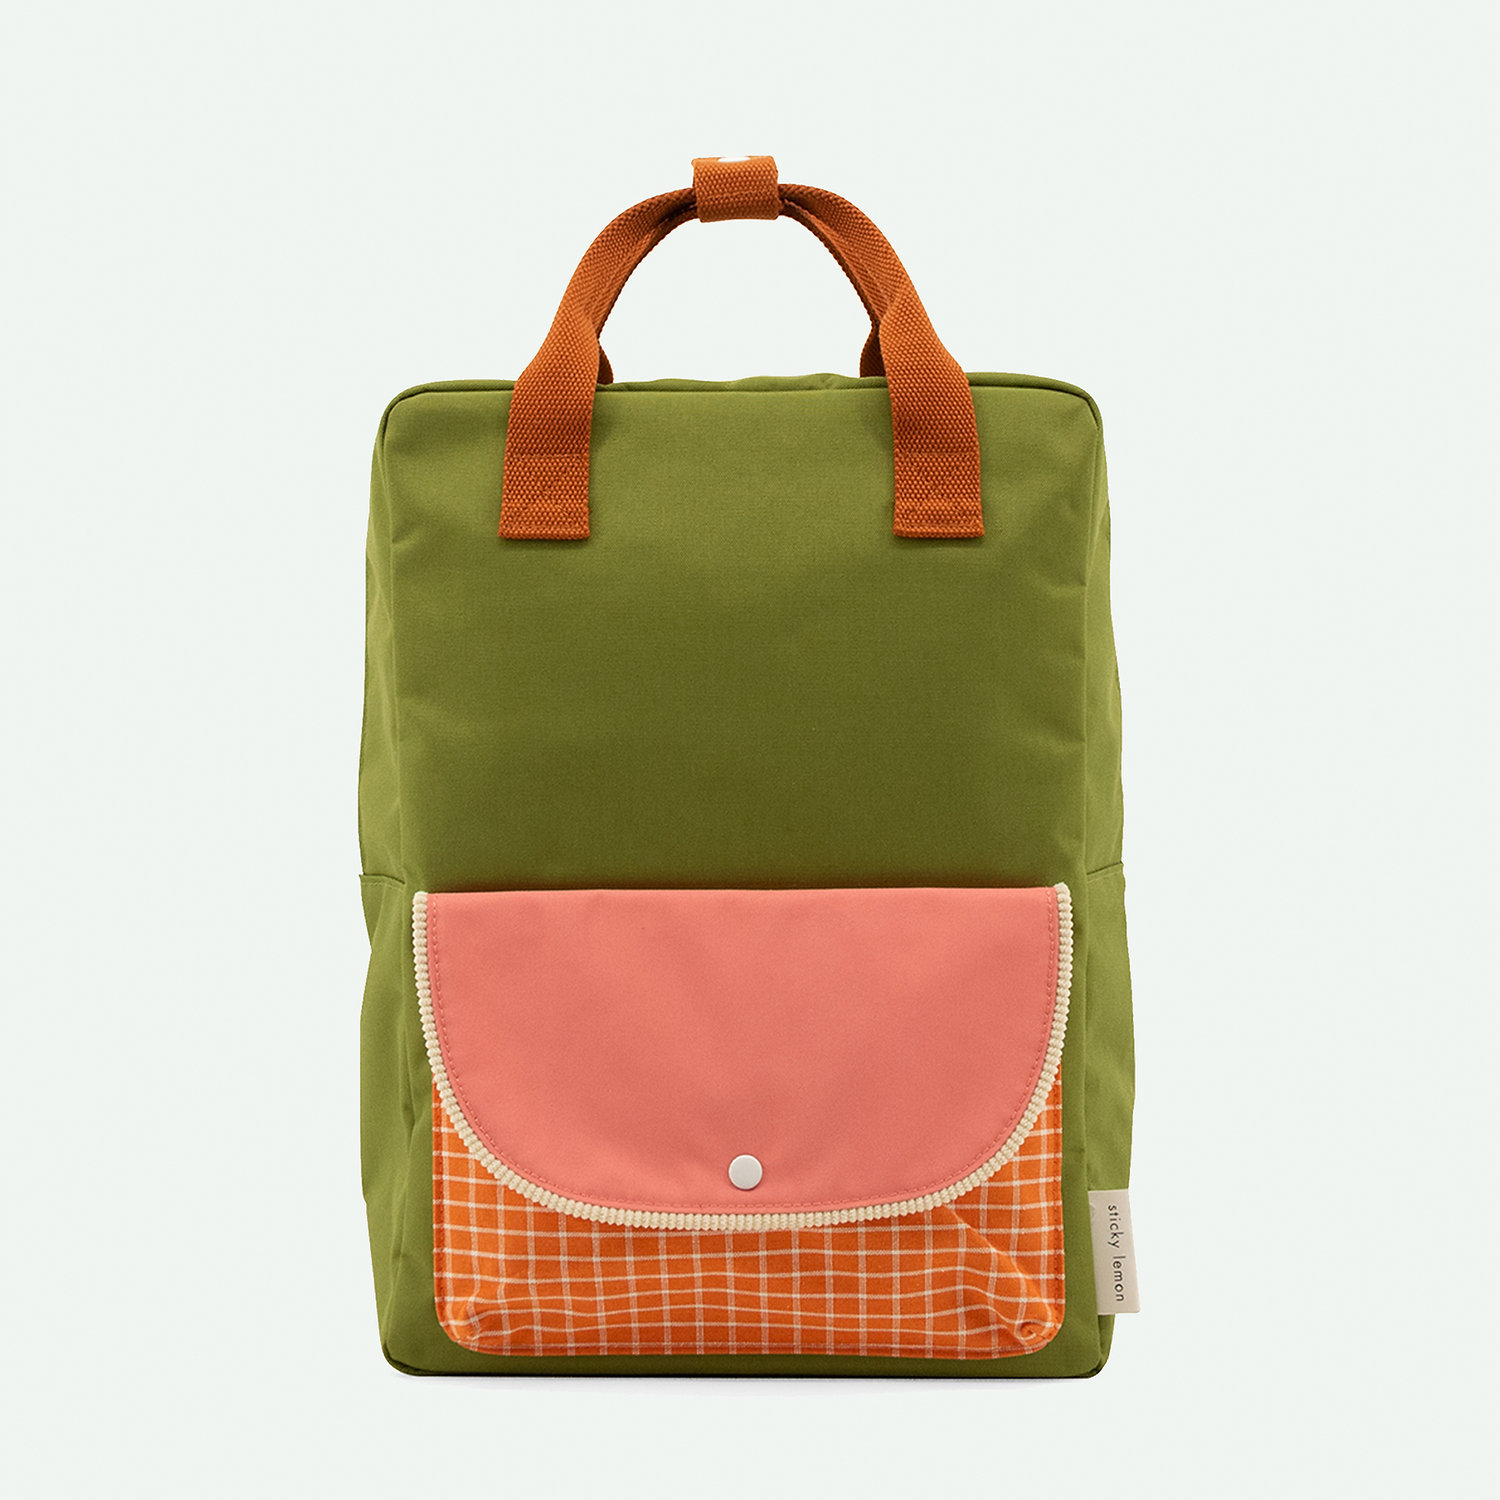 Sticky Lemon Large Sprout Green Farmhouse Backpack